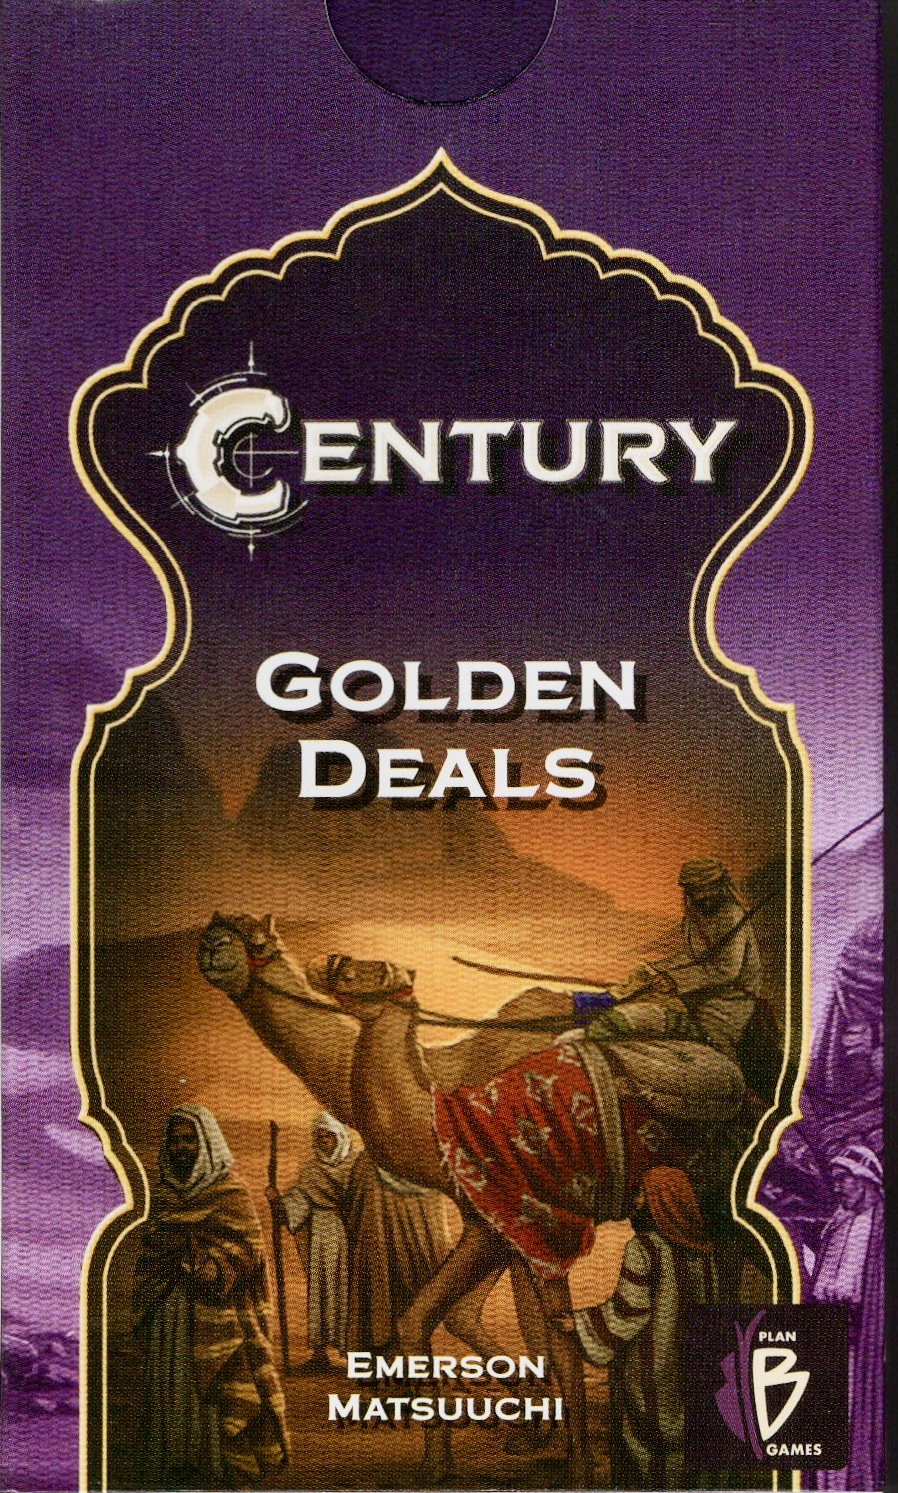 The front cover of the promo box Golden Deals, for use with the board game Century: Spice Road. The box features the game name, promo name, designer's name, against a purple background with an illustration of camels in a desert in the middle.